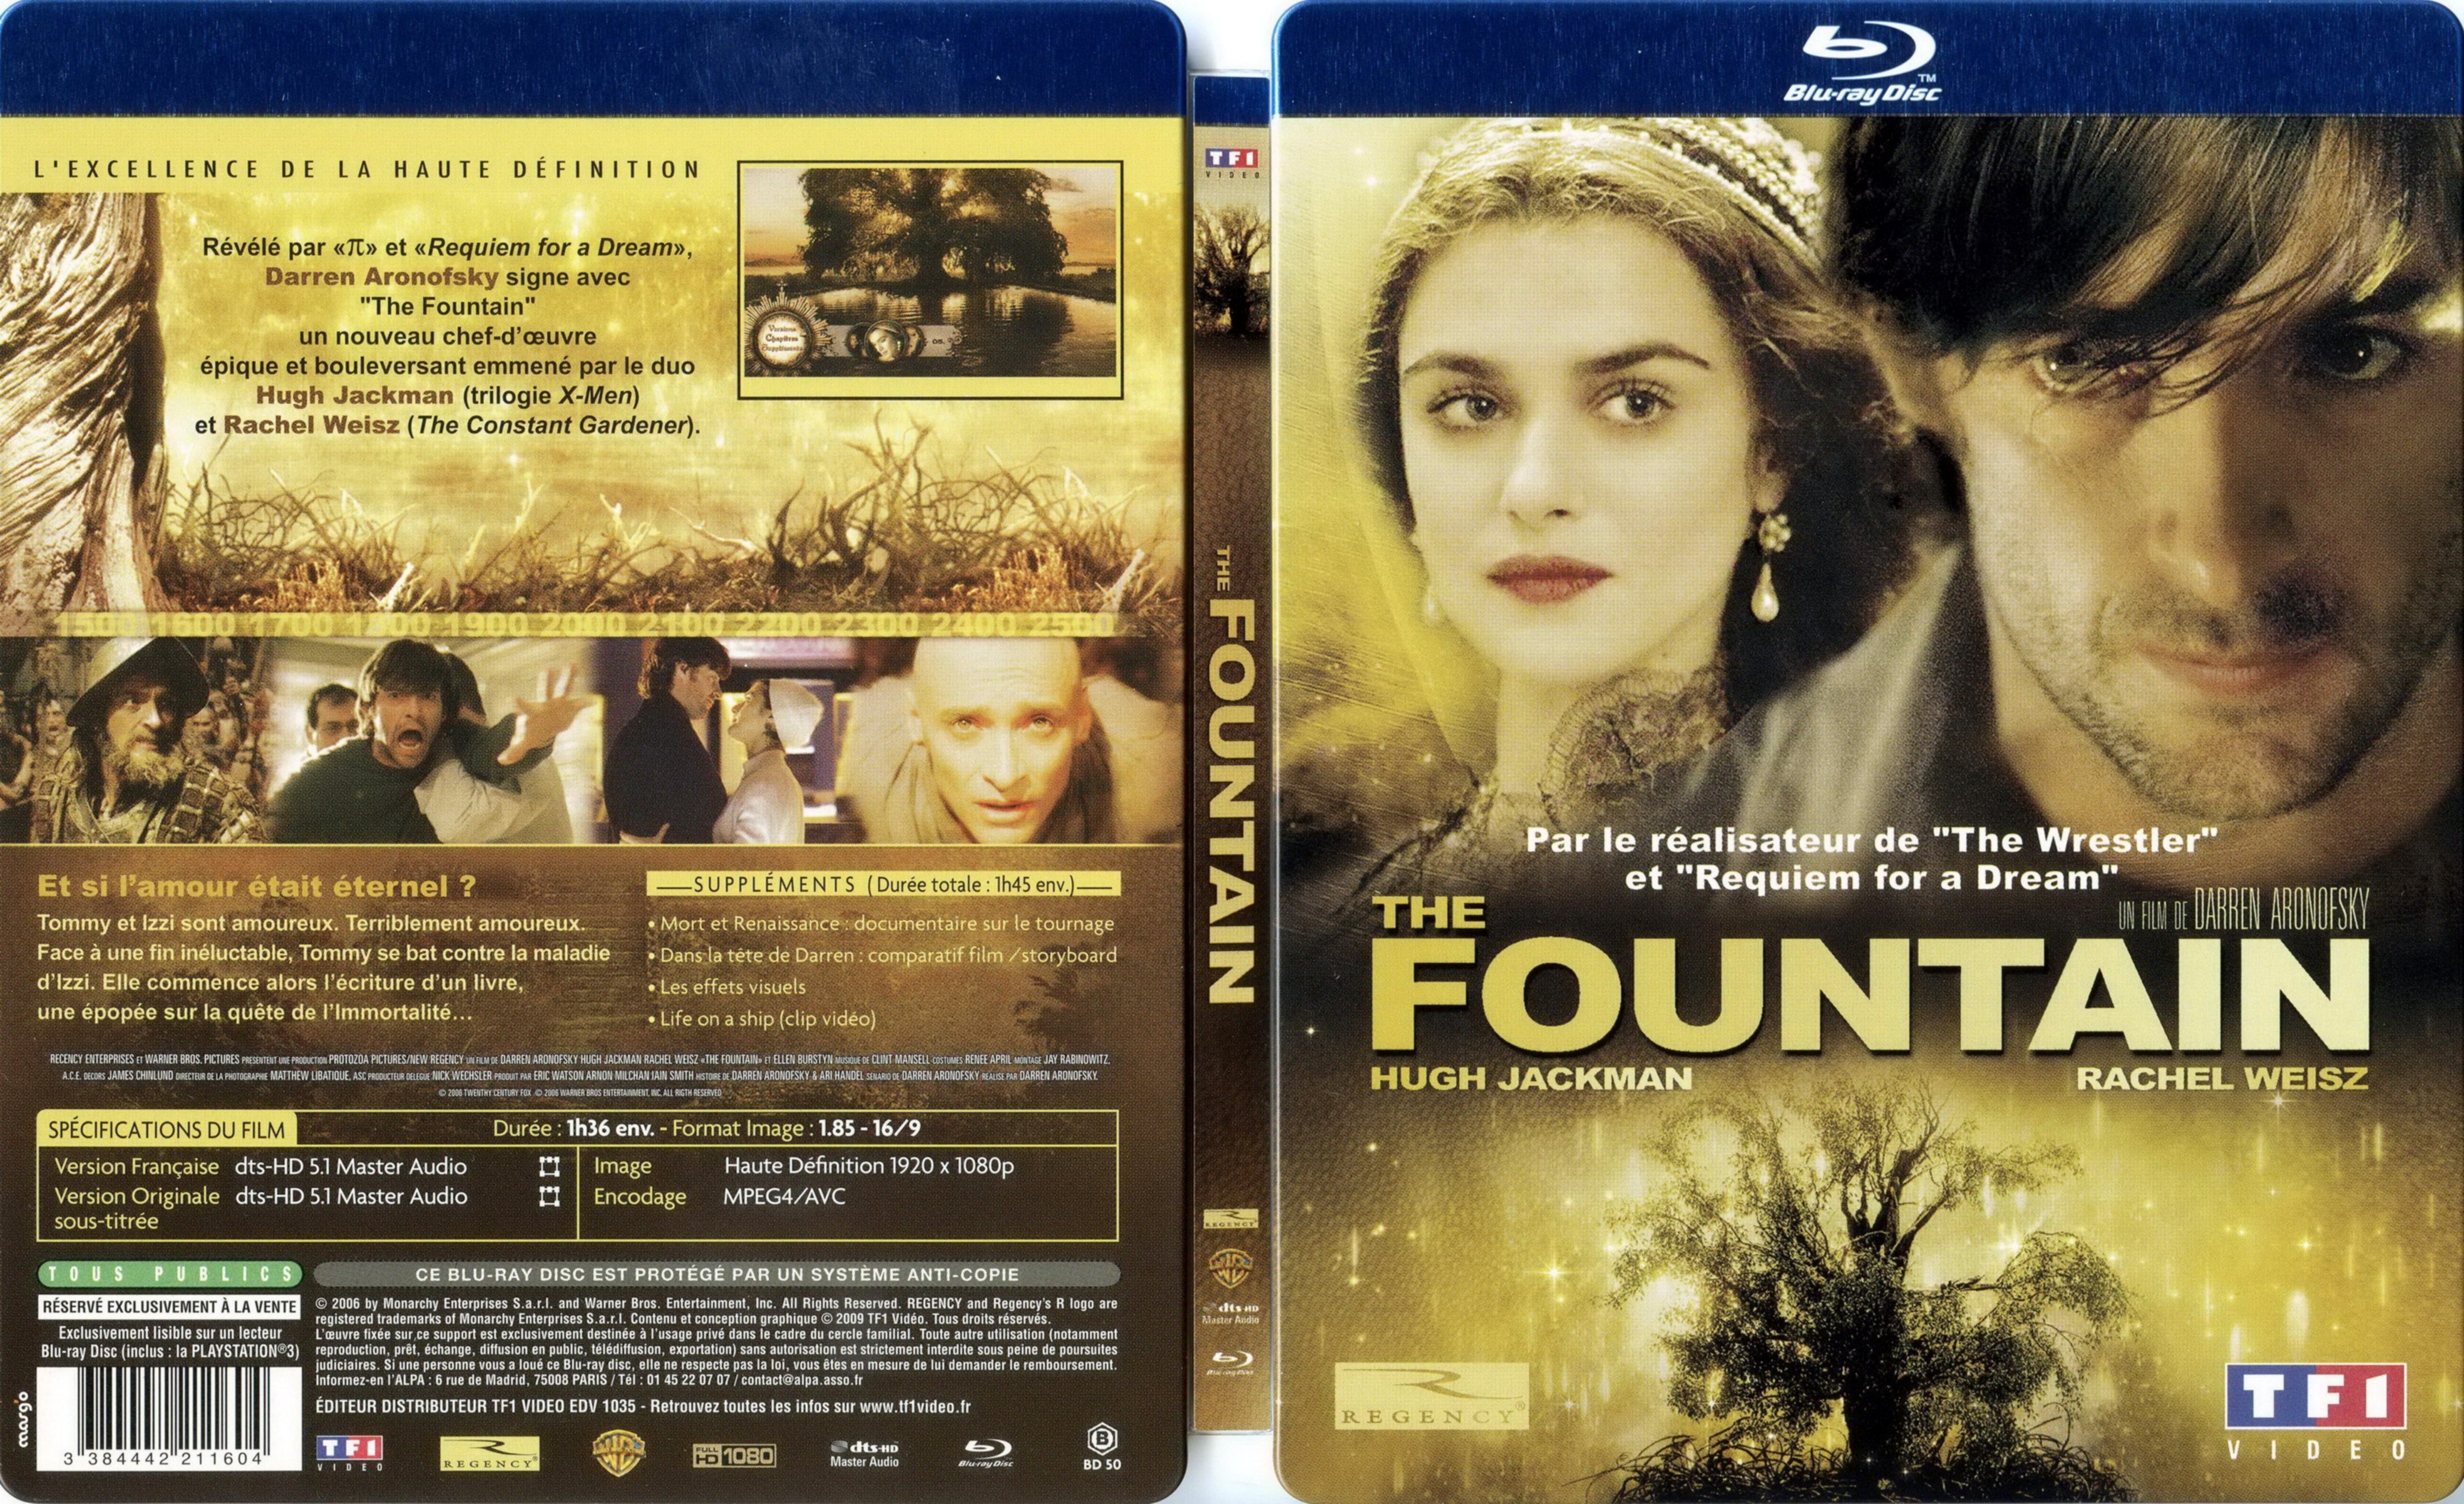 Jaquette DVD The fountain (BLU-RAY)